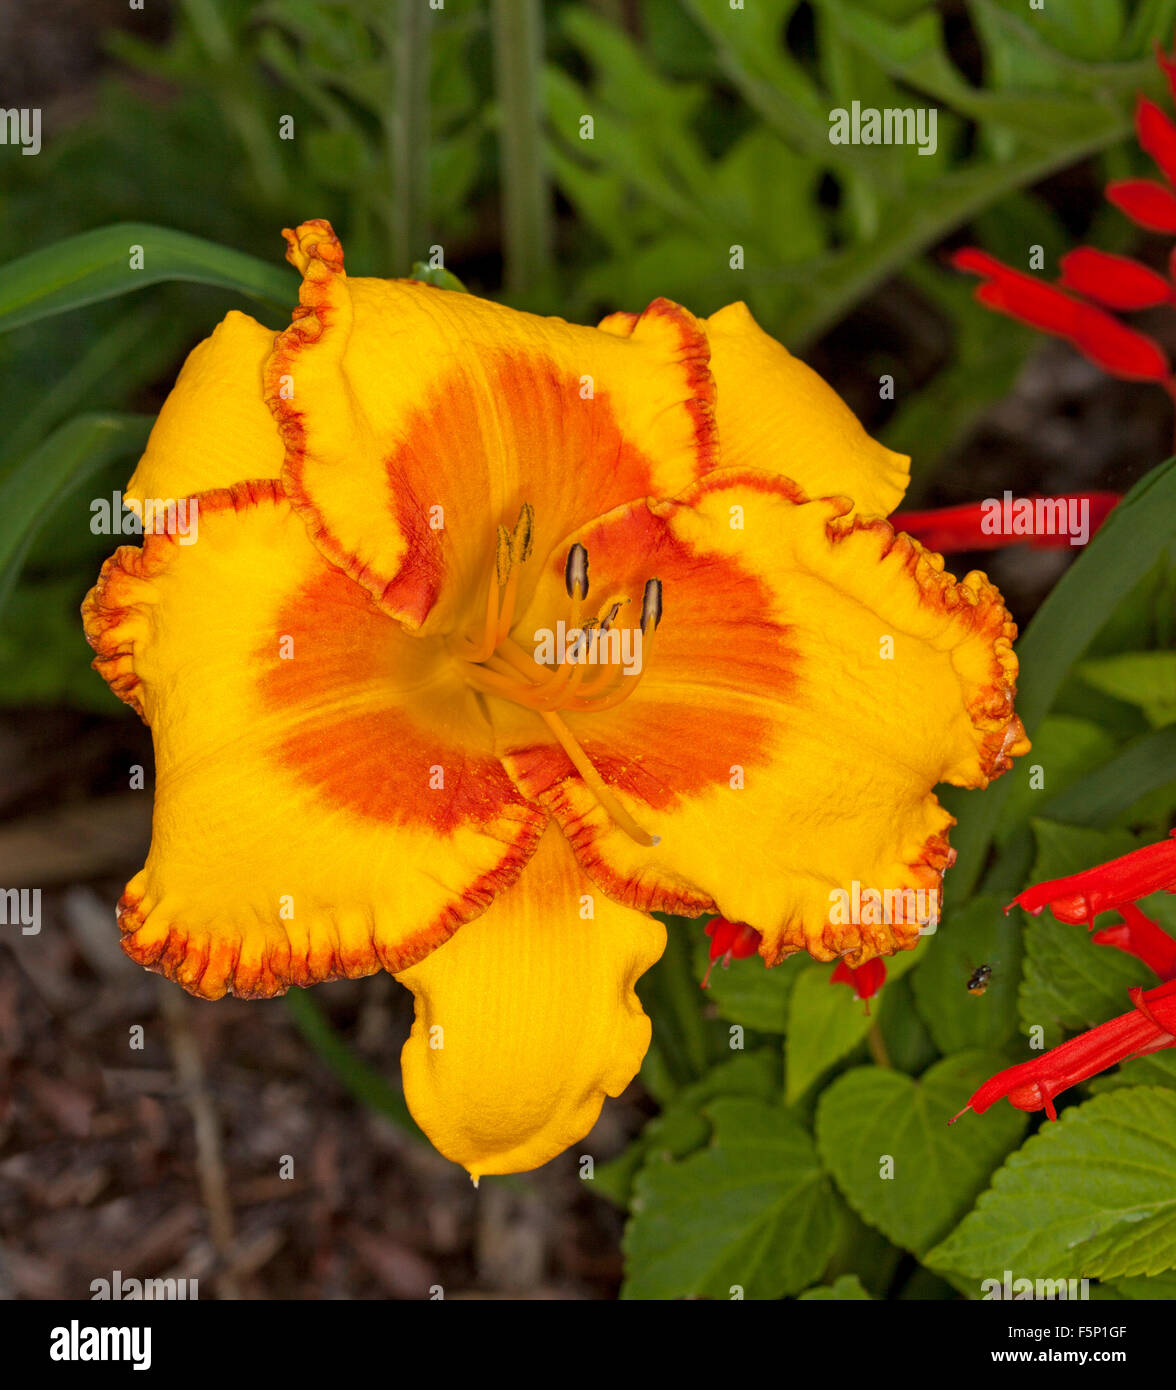 Stunning vivid deep yellow / orange flower of daylily 'Pumpkin Prince' with orange/red throat & red ruffled edges to petals on green background Stock Photo